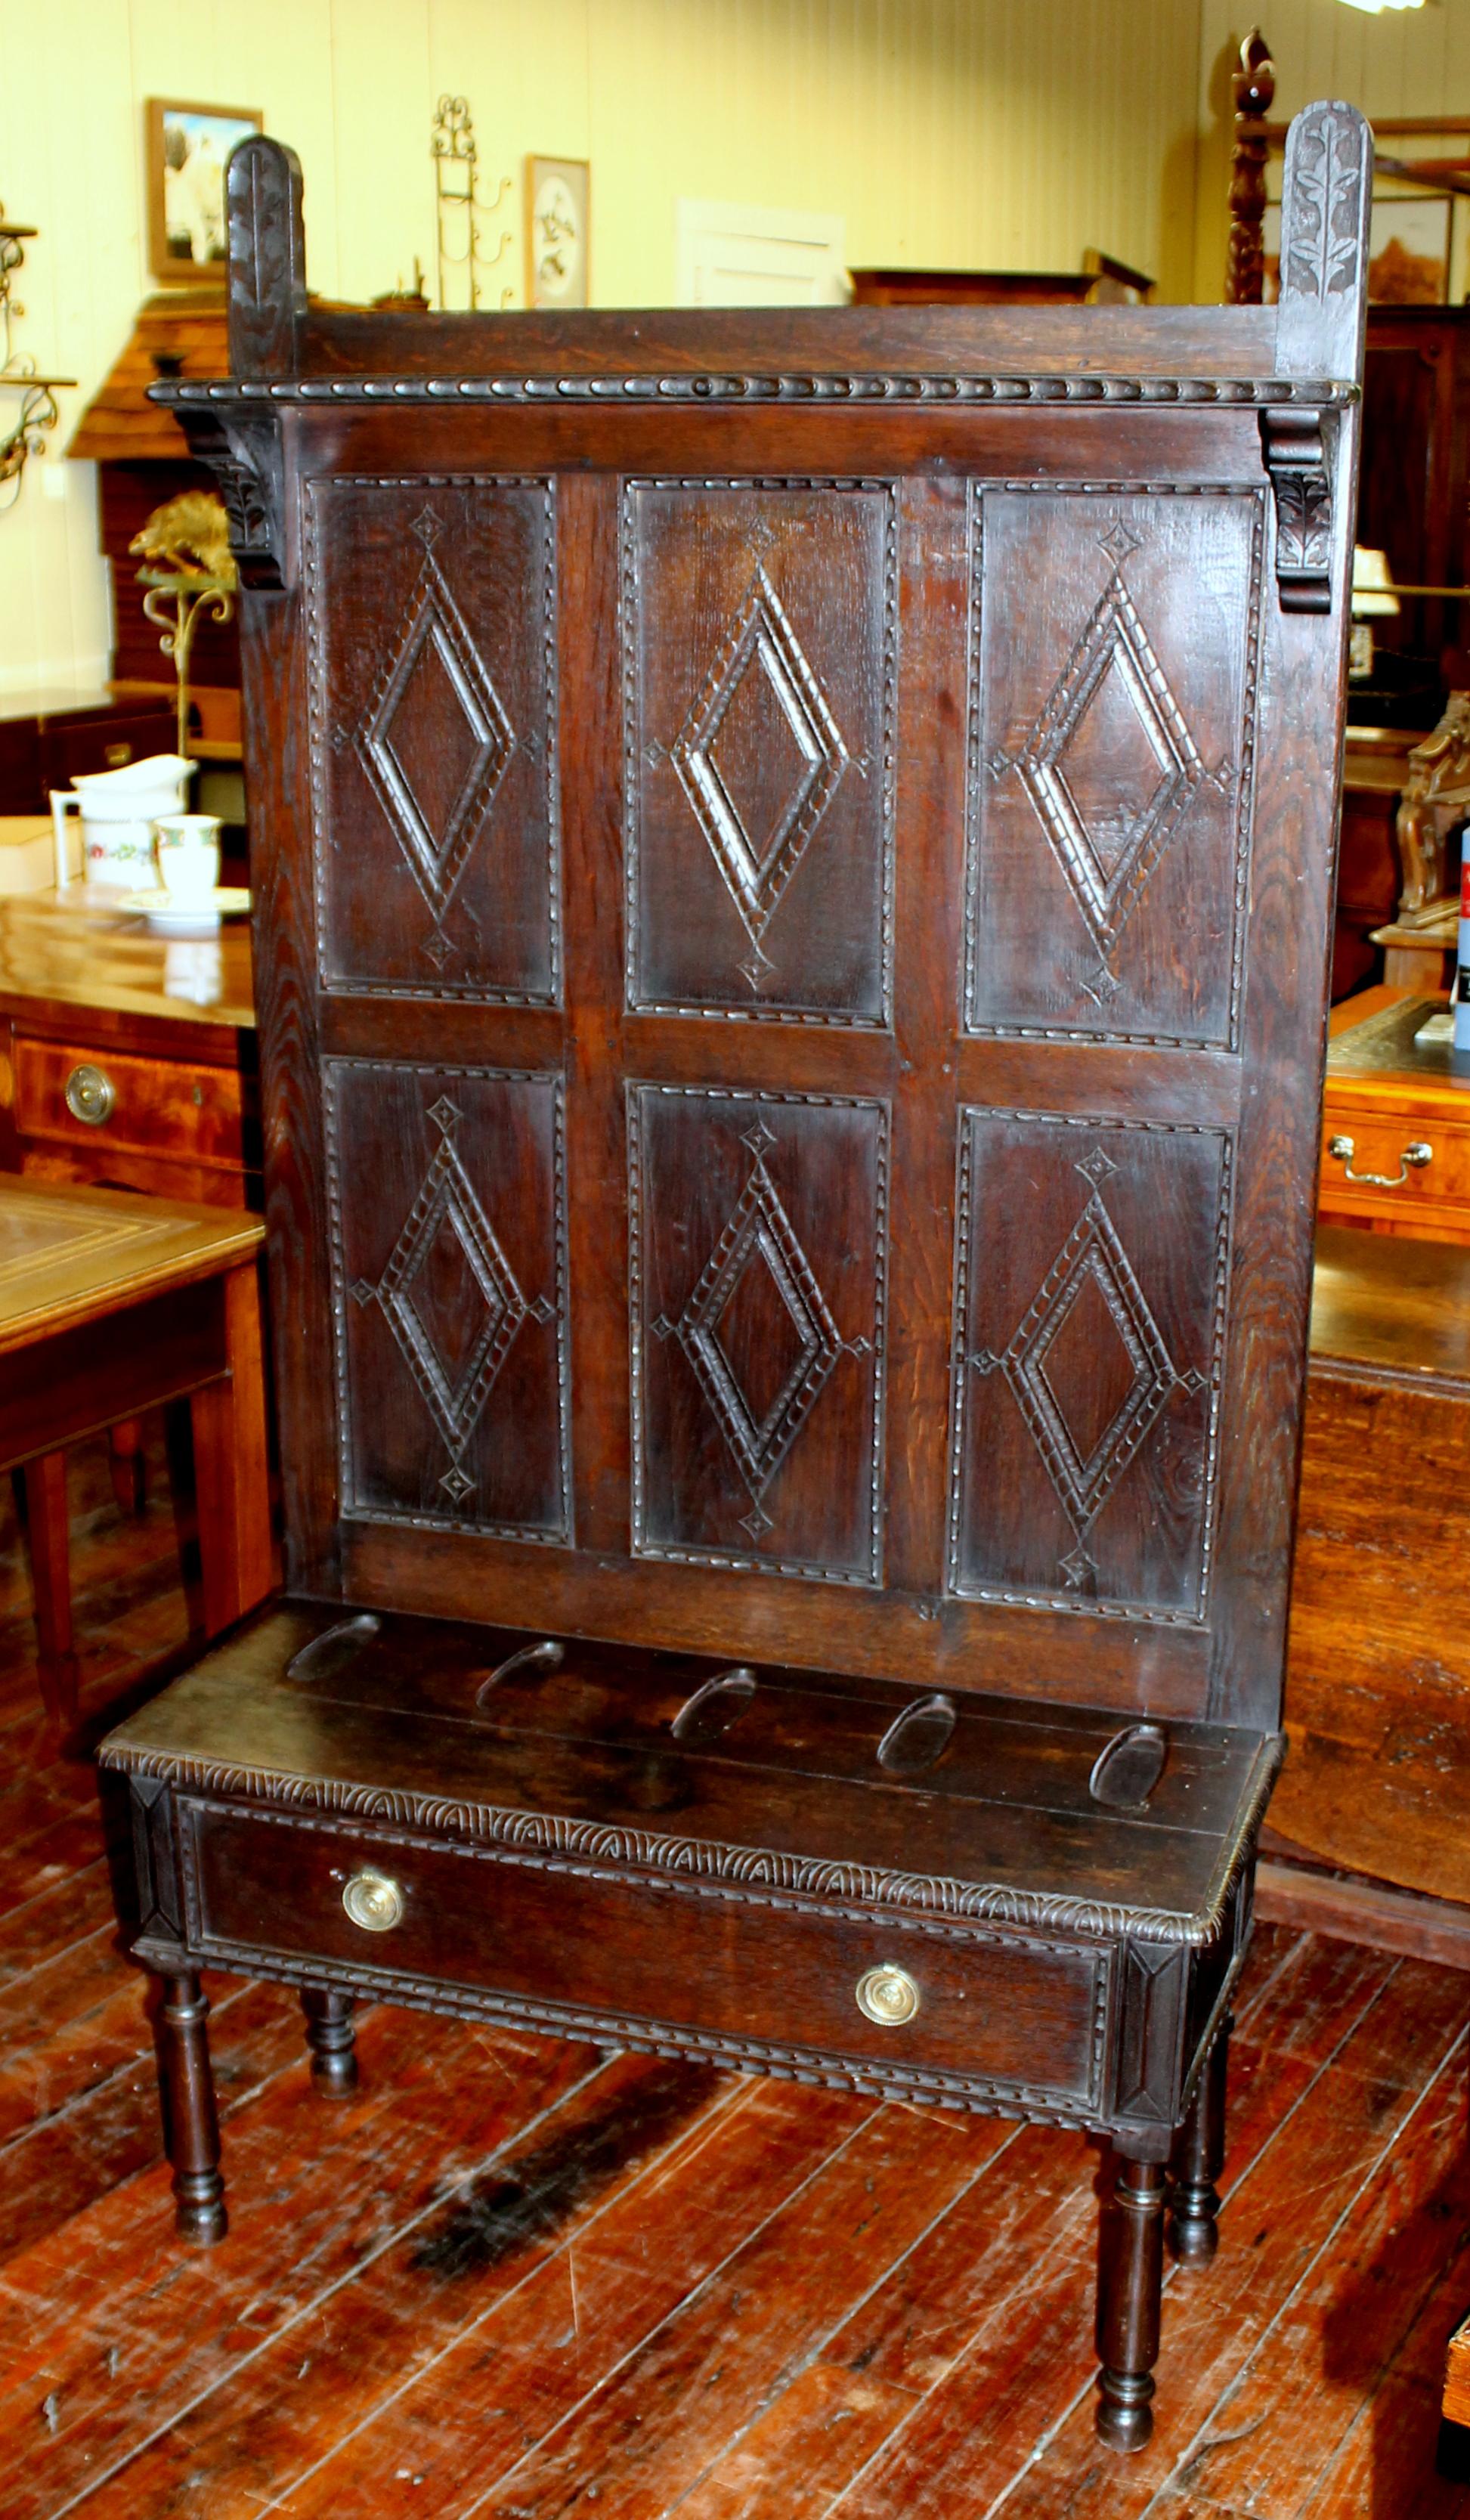 Very rare antique English hand carved oak Jacobean style gun rack and dettle with lower drawer.
Used as a 